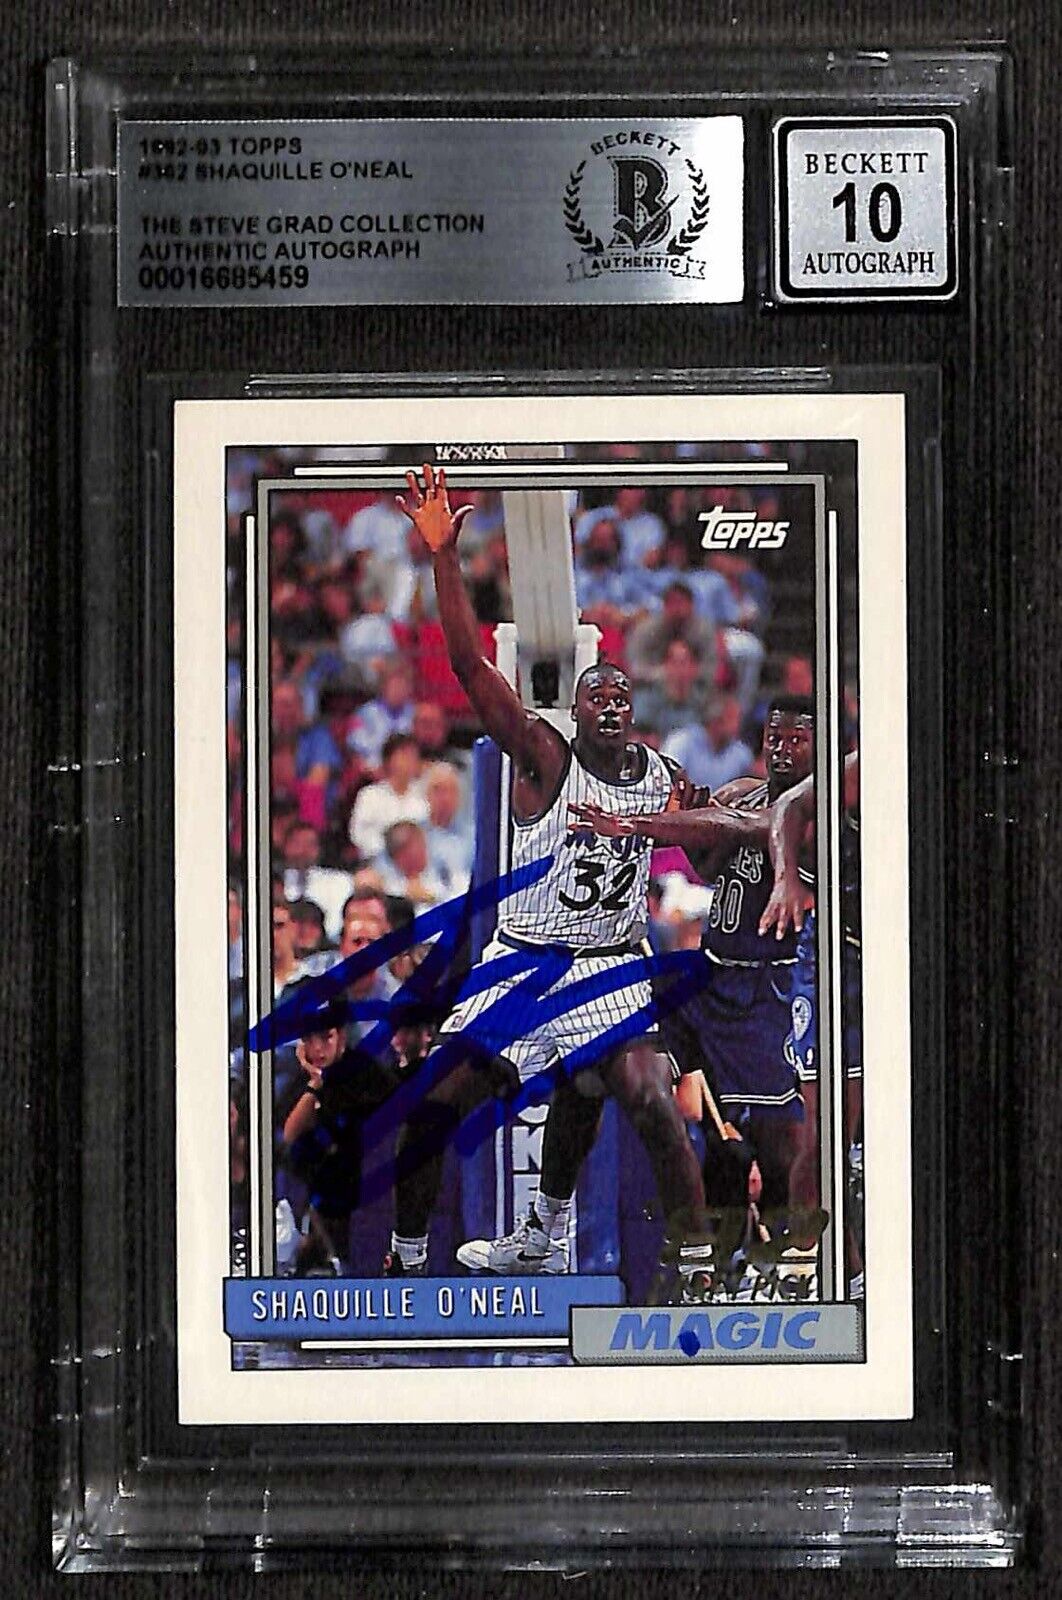 Shaquille O'Neal Signed 1992/93 Topps #362 Rookie Card AutoGrade 10 BECKETT